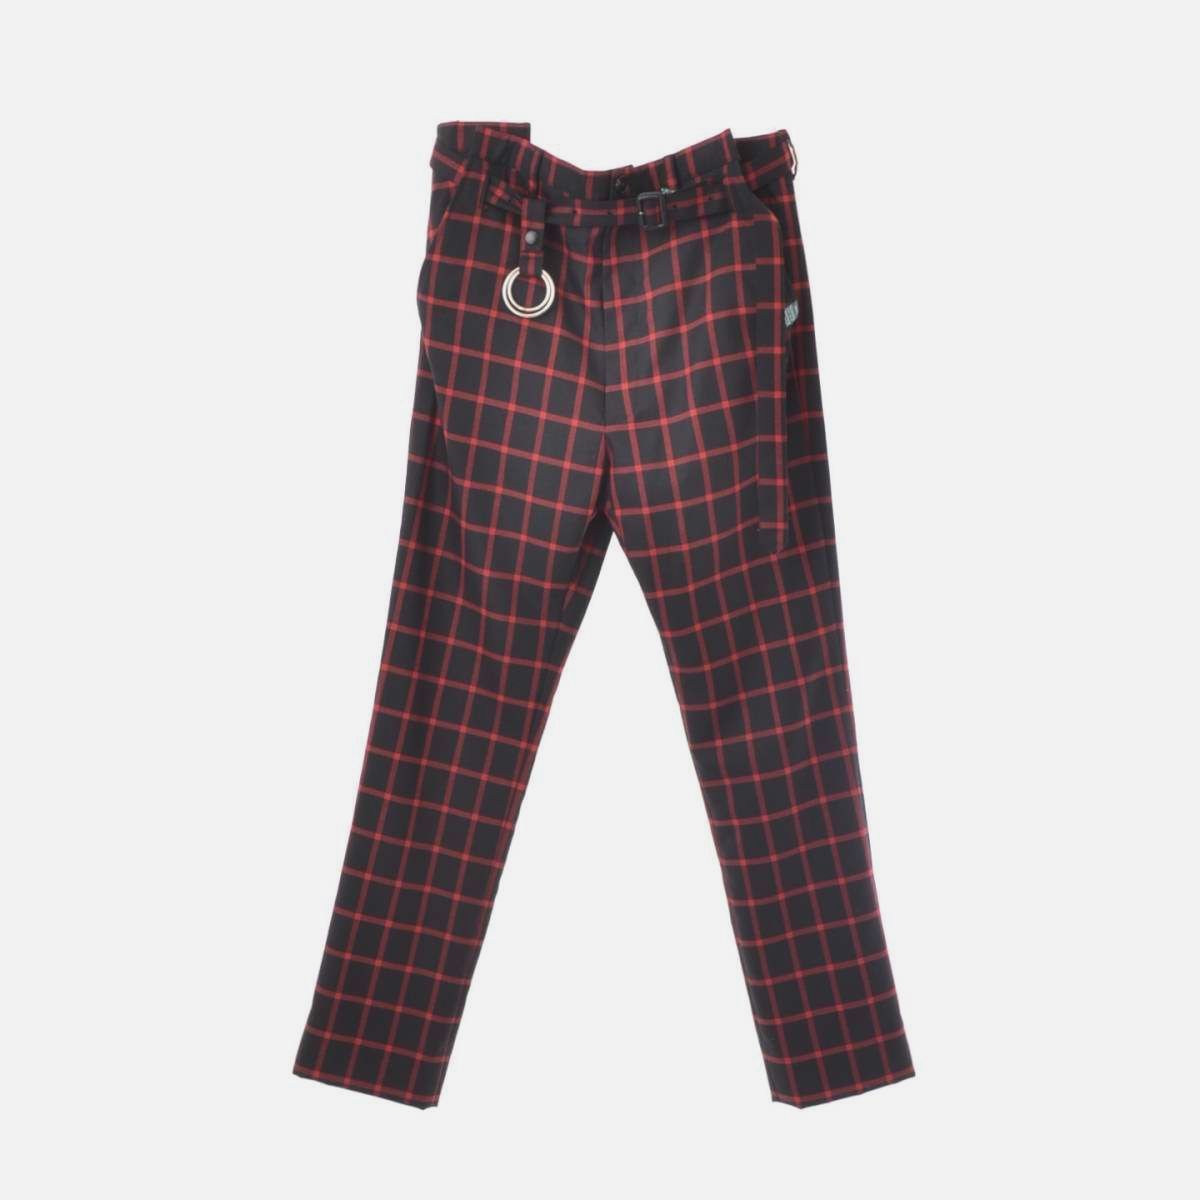 FRONT GATHER CHECK PANT